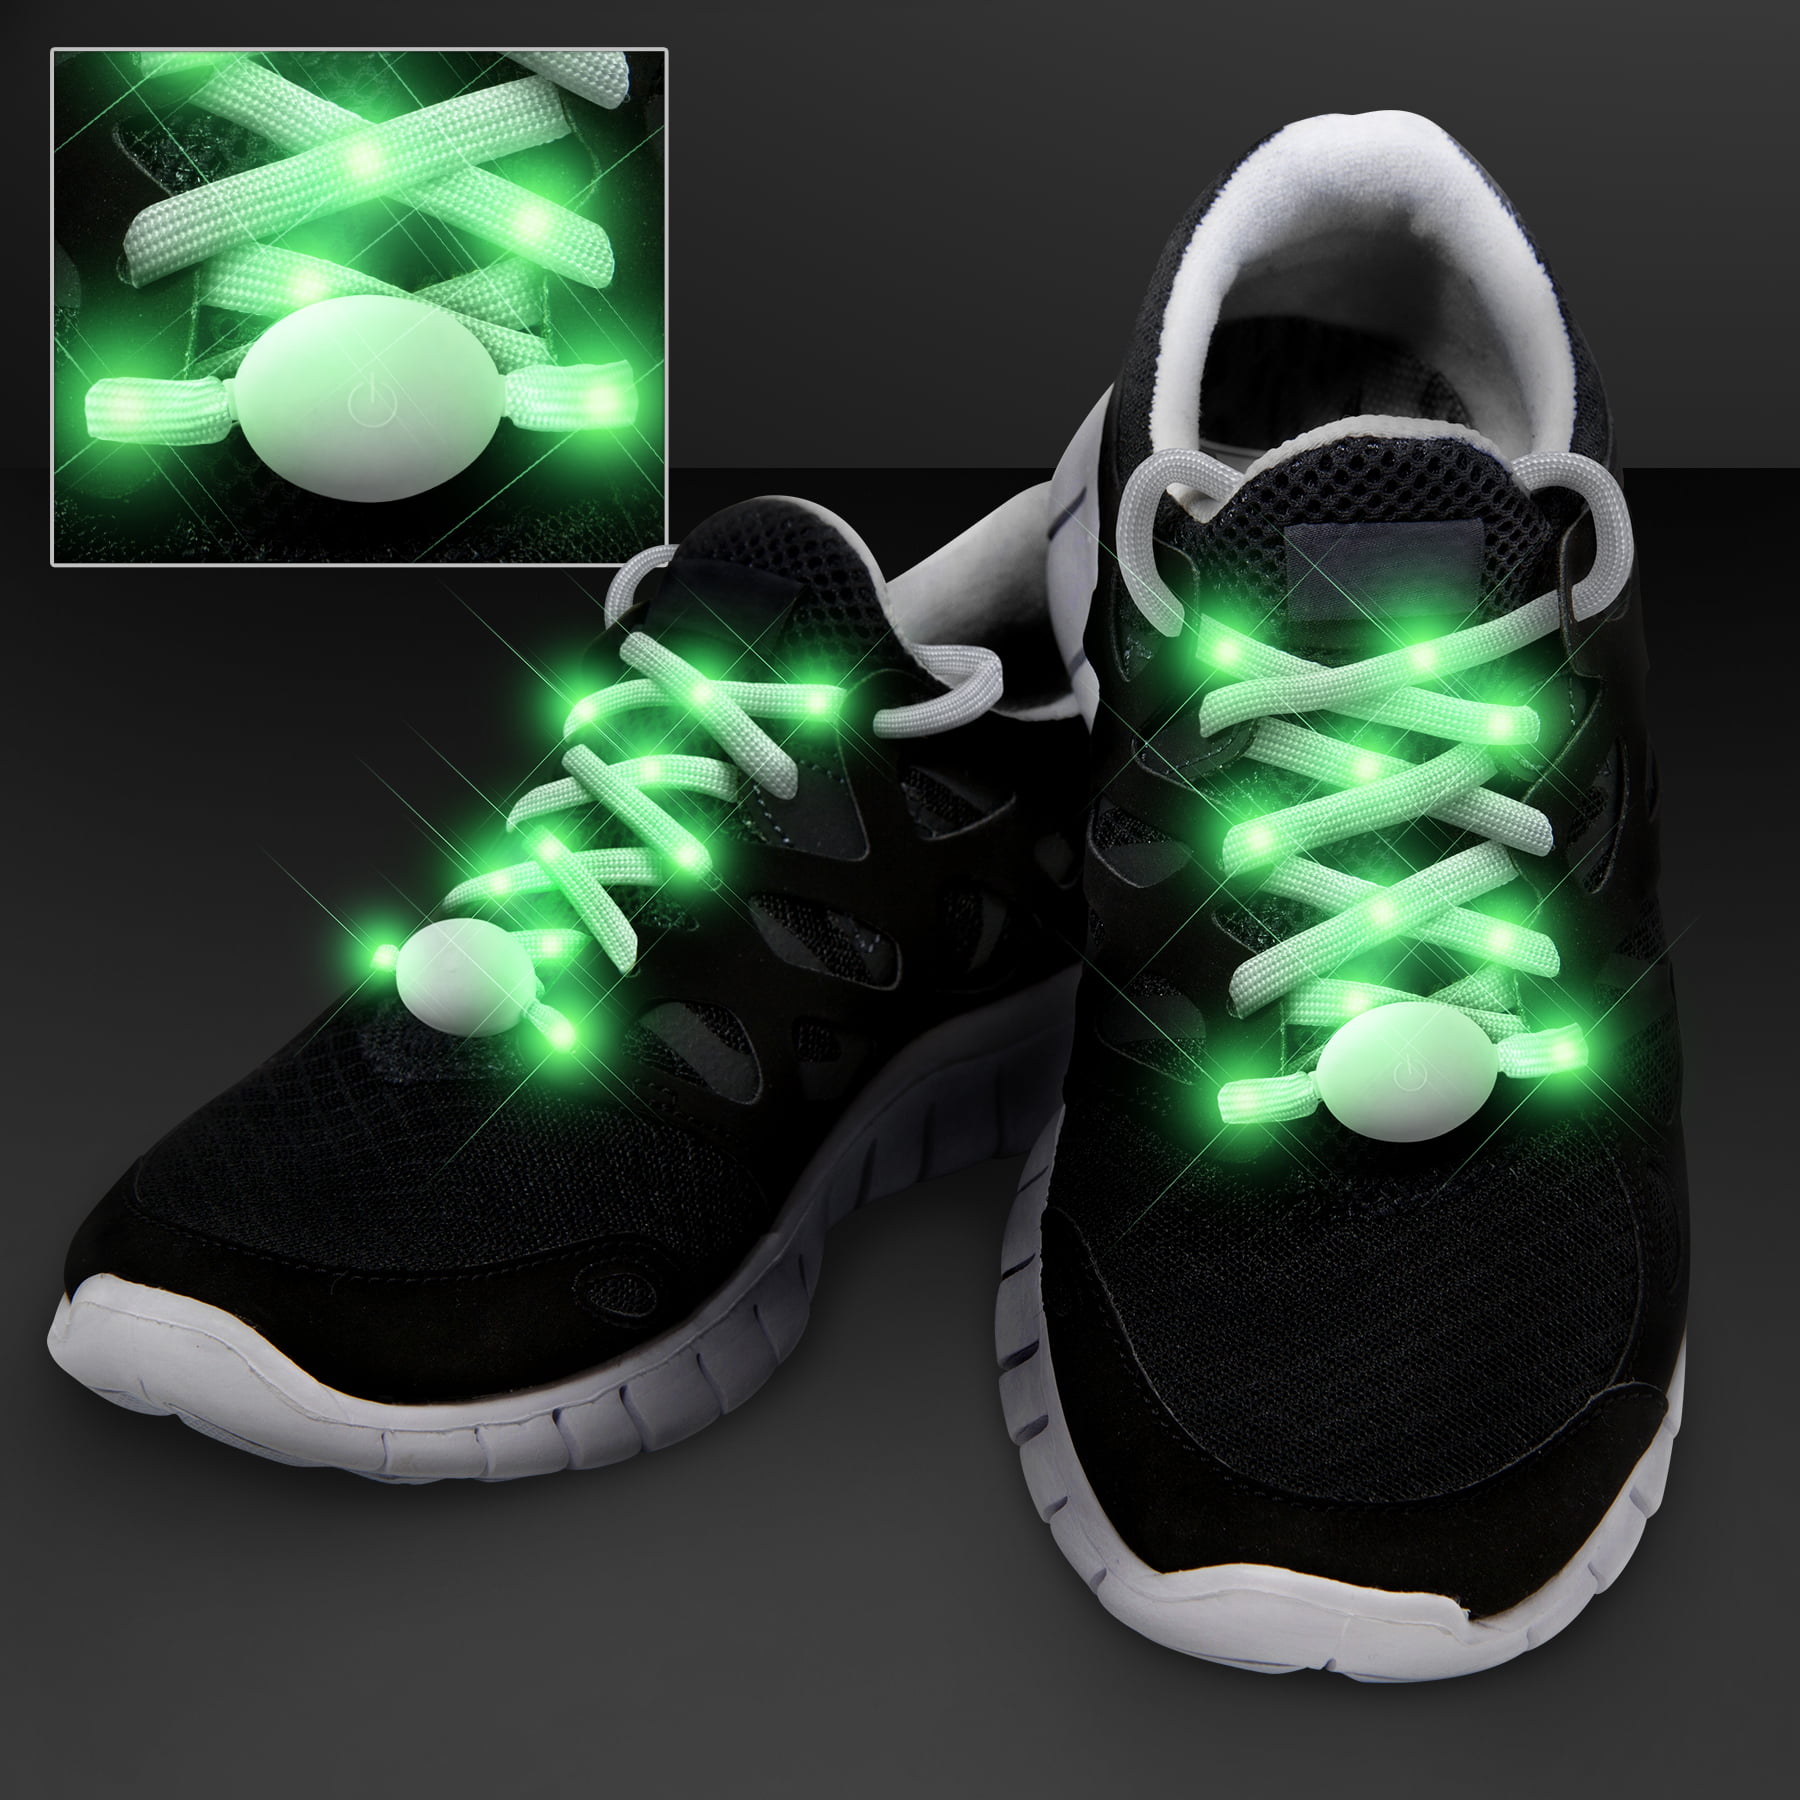 BLUE AND GREEN,NEW TWO PAIRS OF LED SHOELACES 